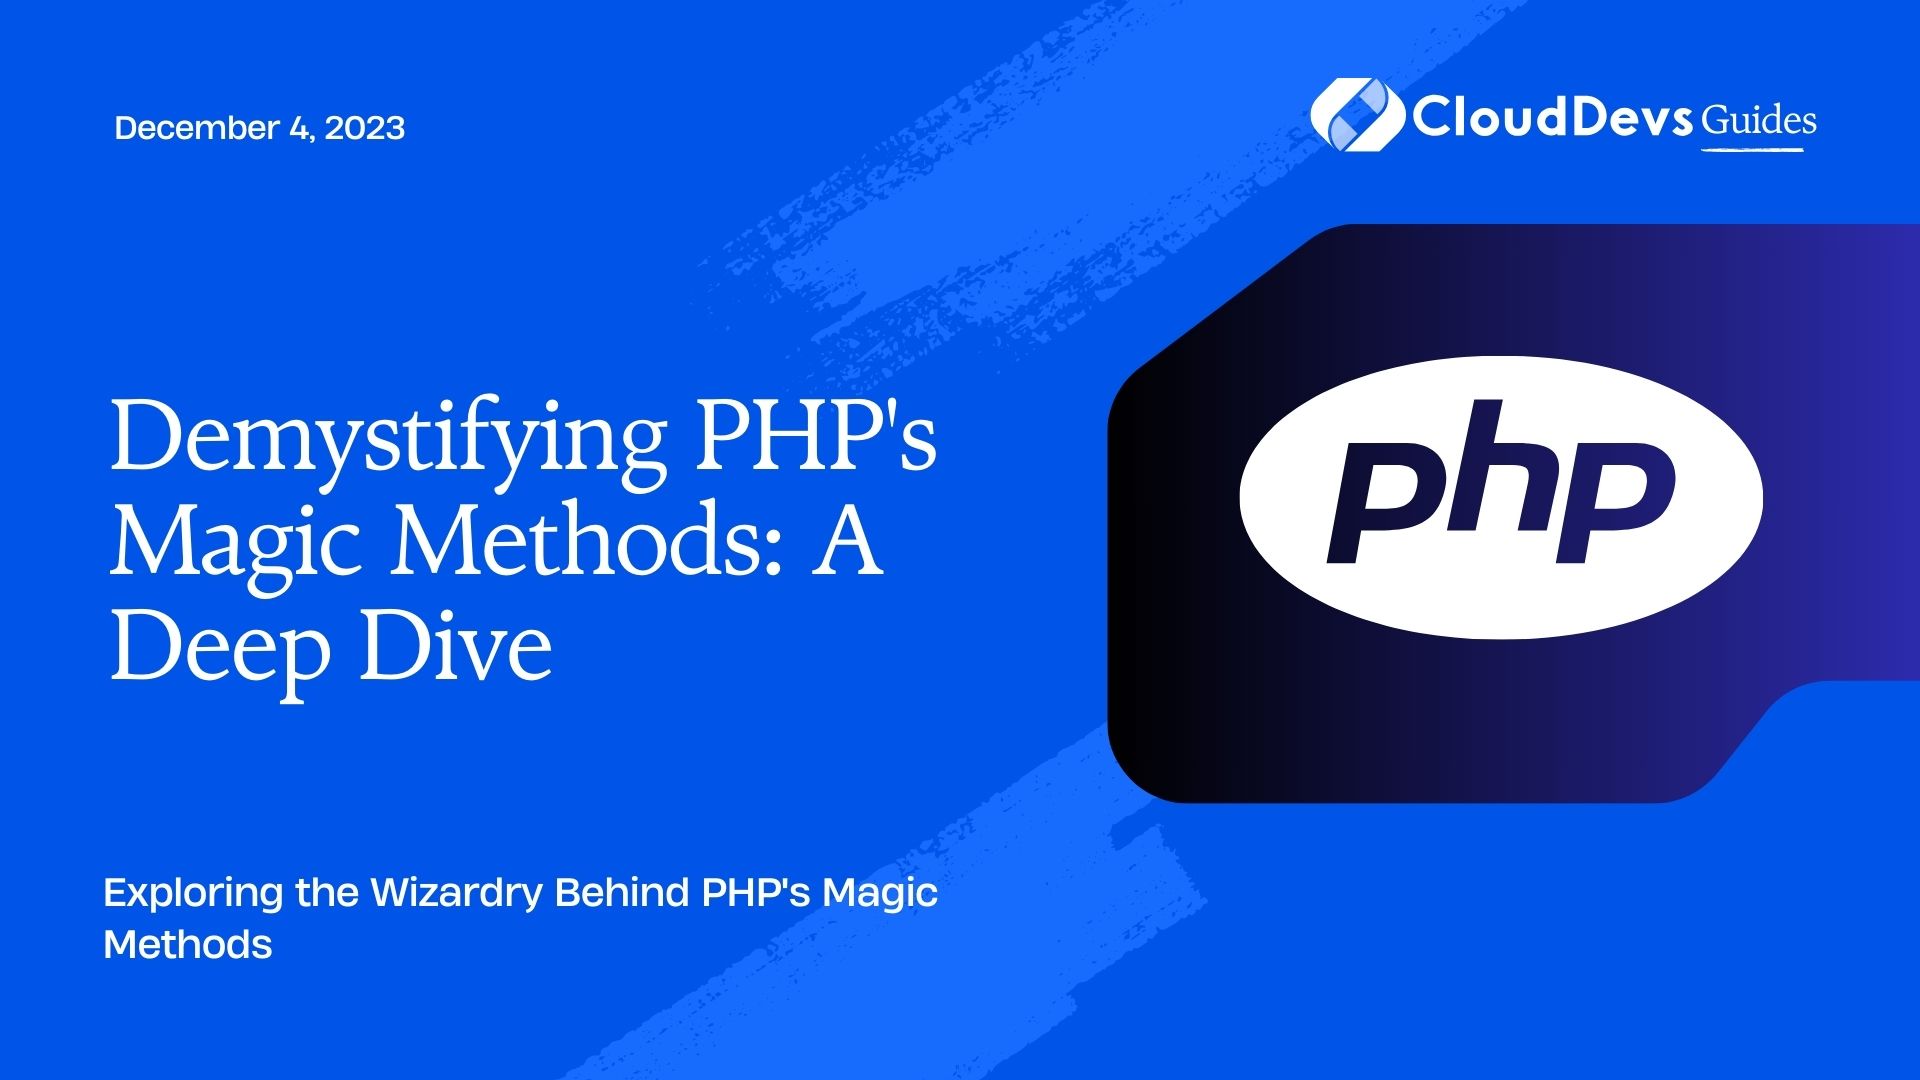 Demystifying PHP's Magic Methods: A Deep Dive